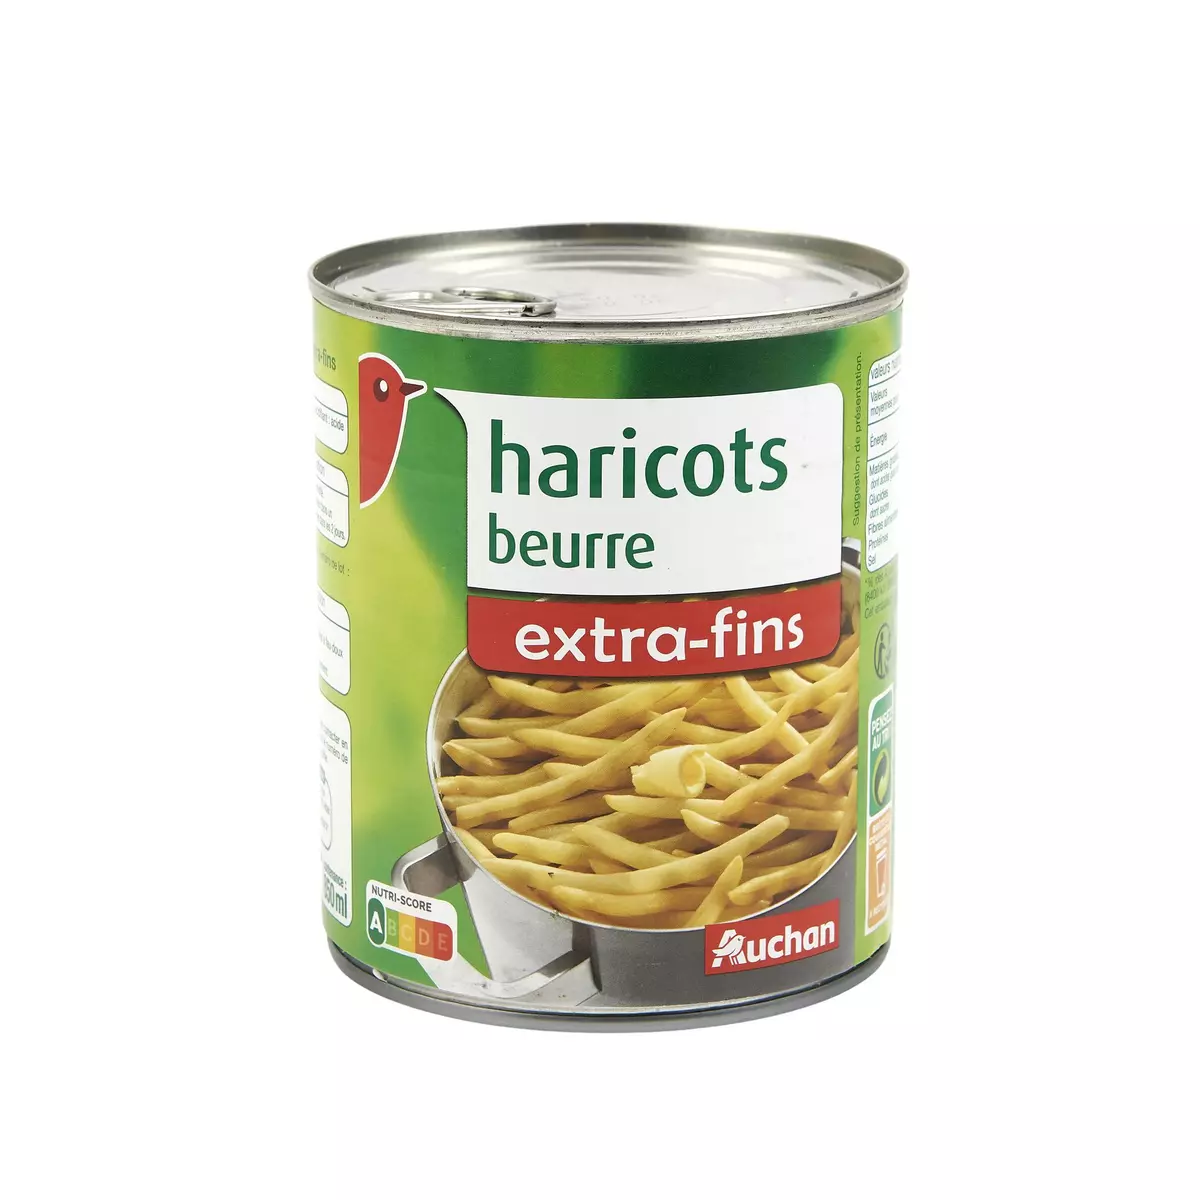 AUCHAN Haricots beurre extra fins 400g